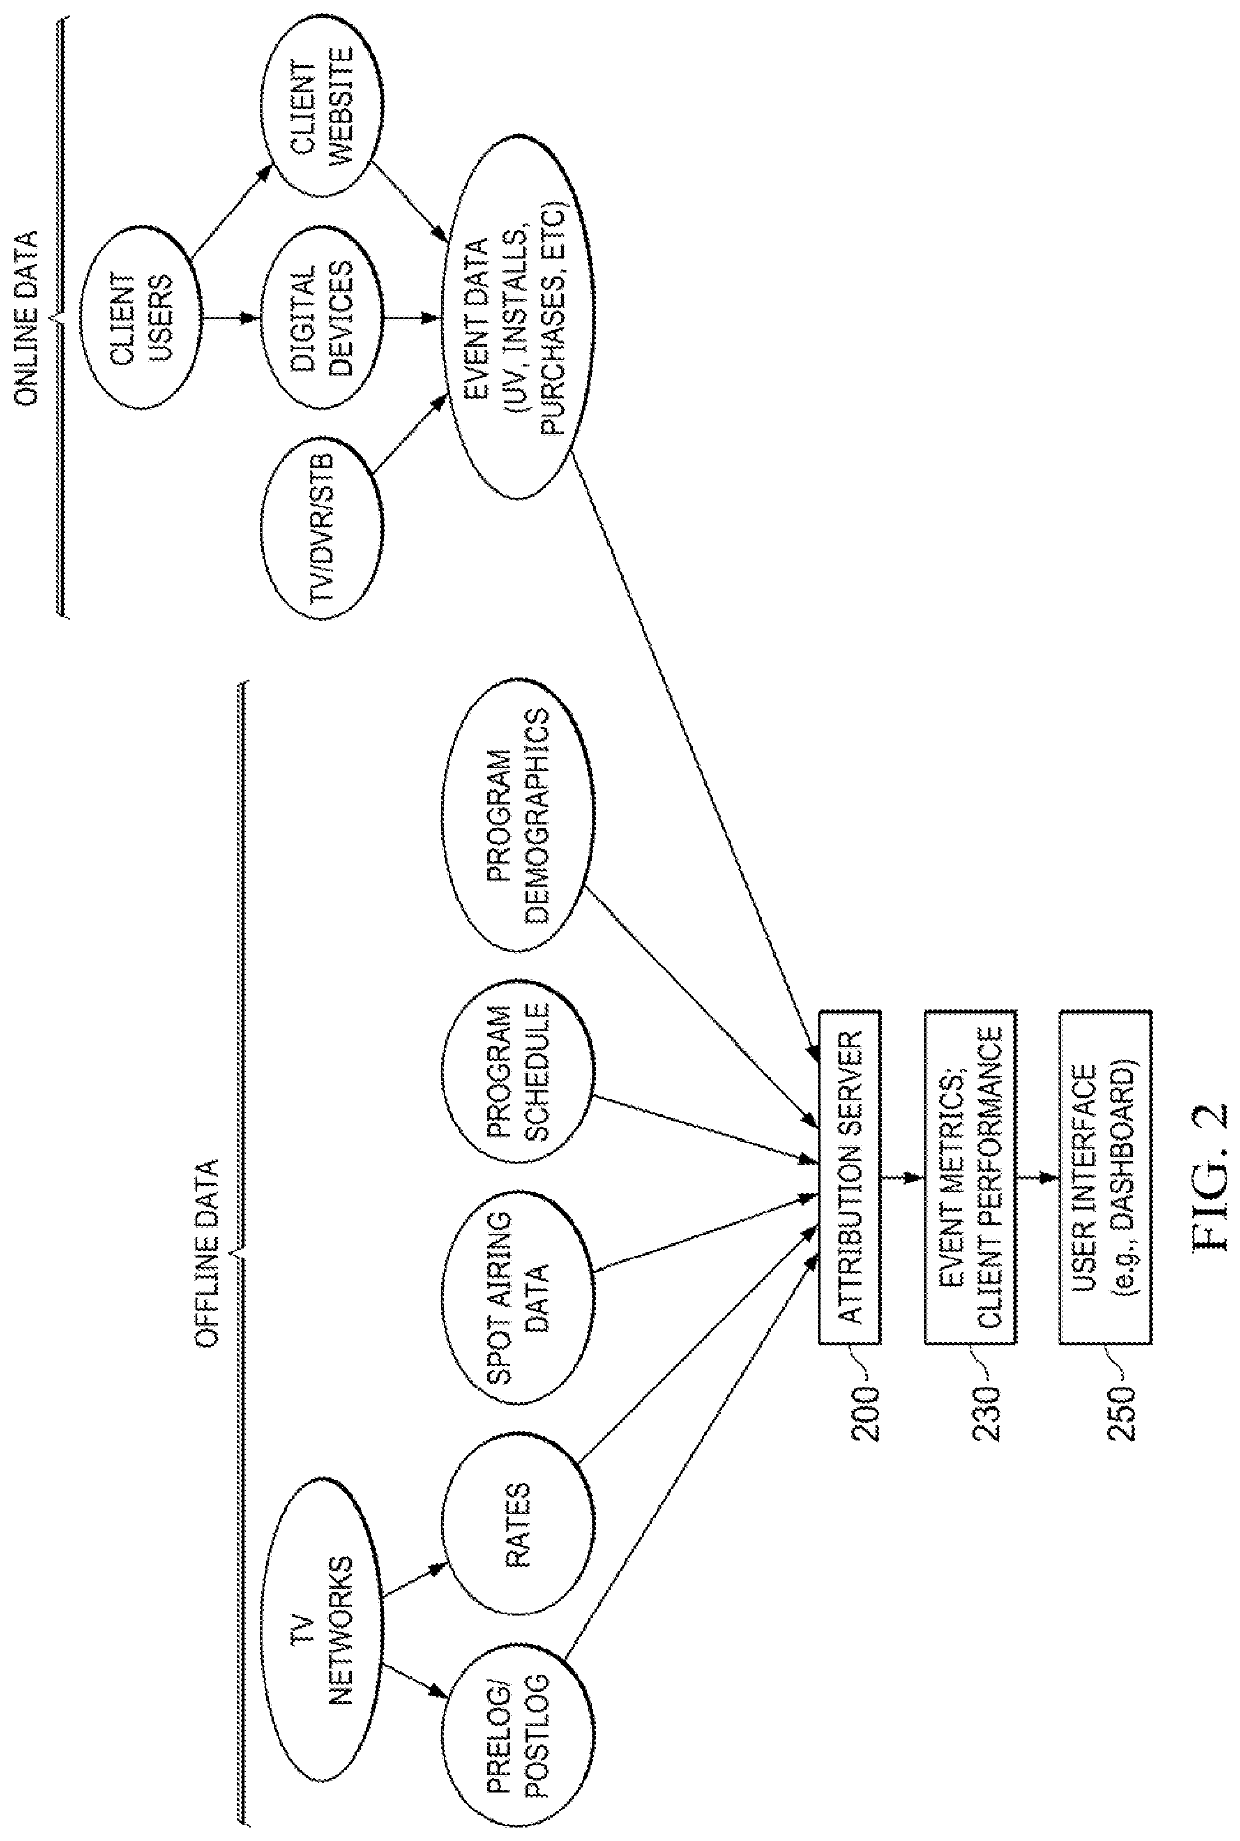 Systems and methods for attributing TV conversions